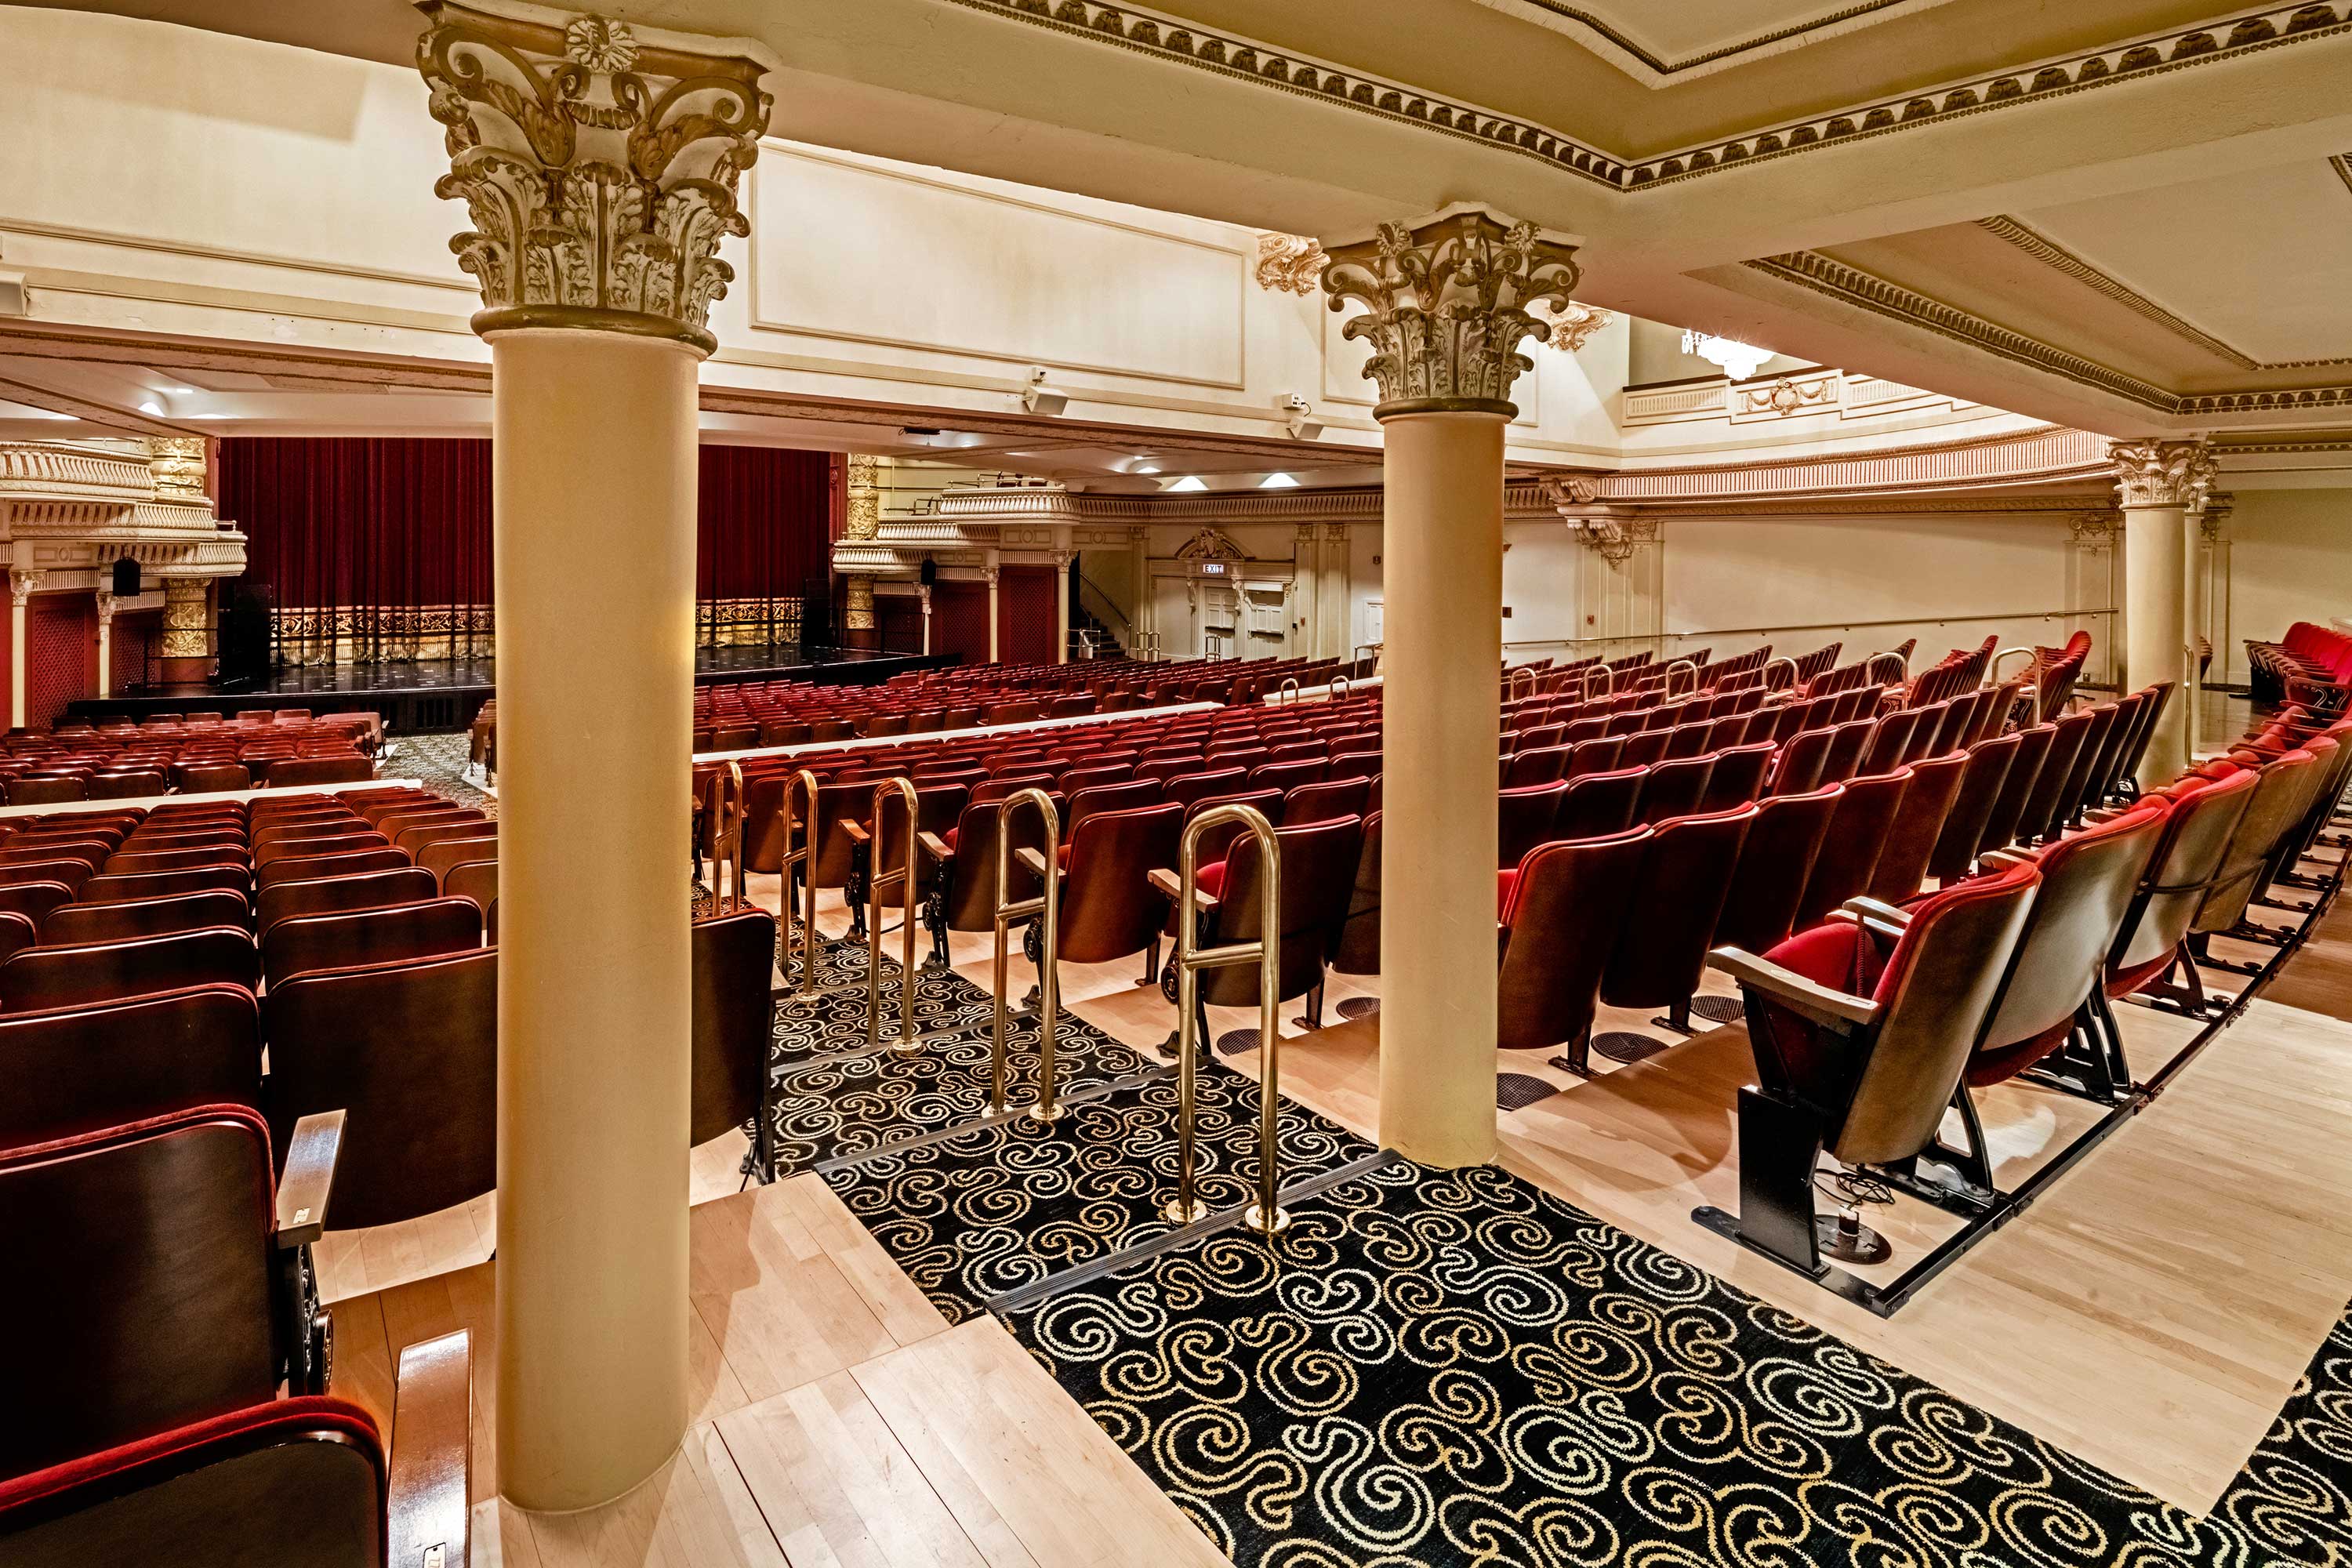 View of the restored floor seating of the Capitol Theatre in Salt Lake City by Alan Blakely, architecture photographer.